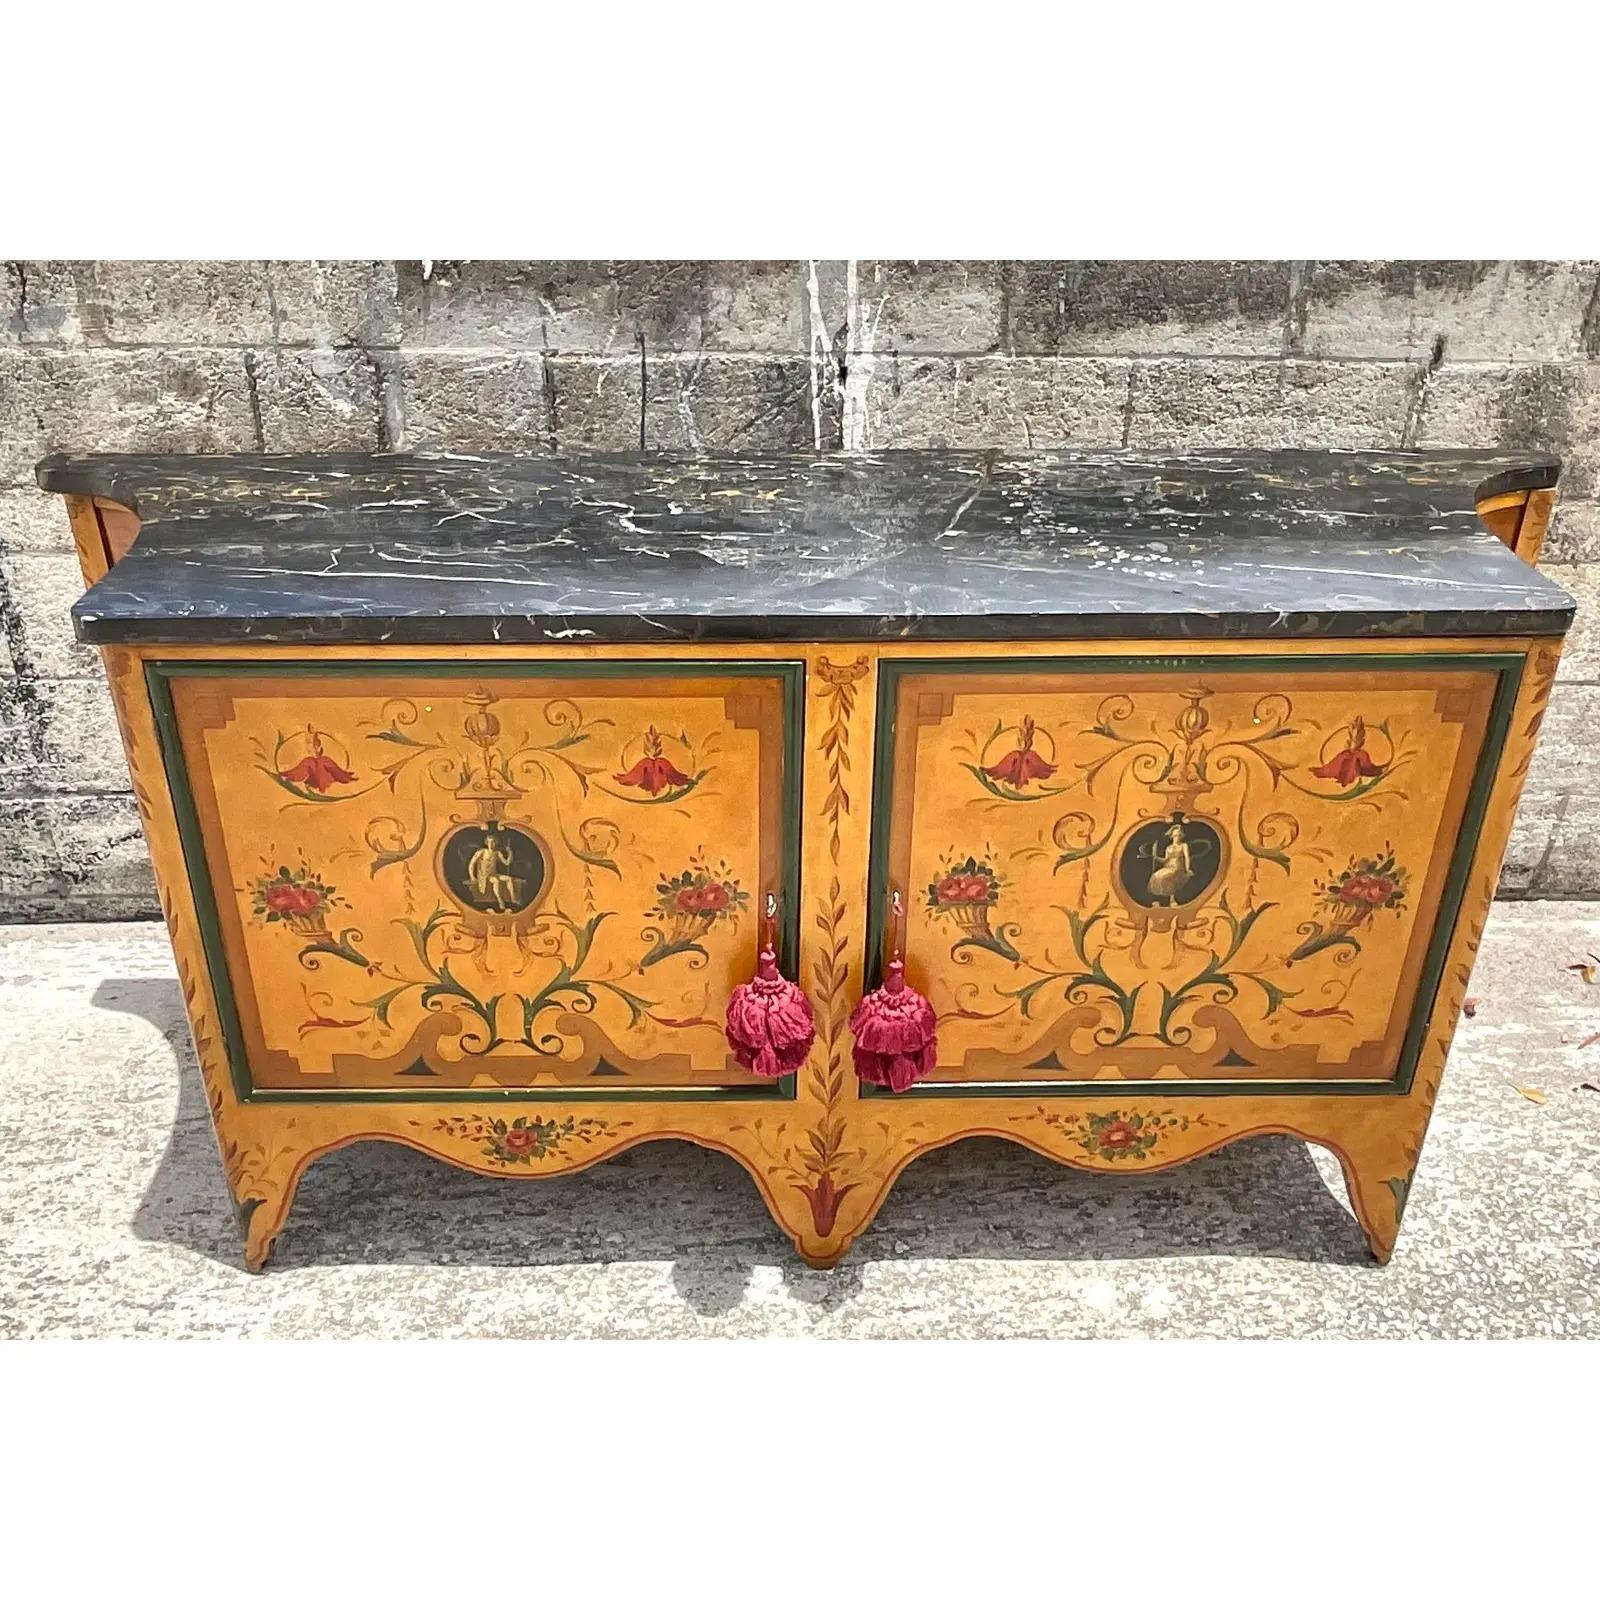 Stunning vintage hand painted credenza. Beautiful bold colors and a chic stone top. Lots of great storage below. Acquired from a Palm Beach estate.